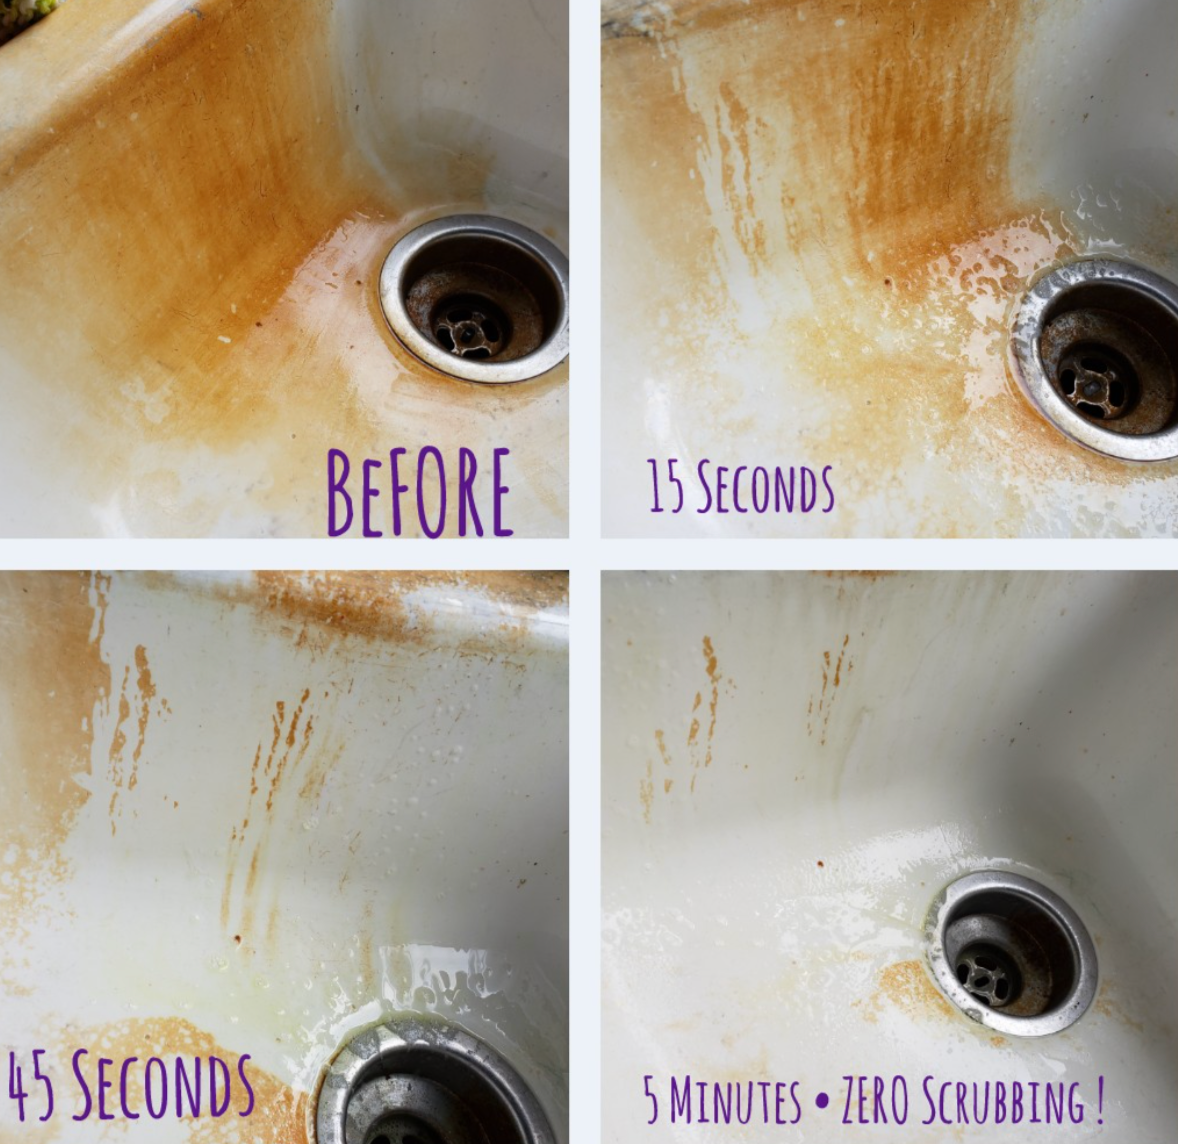 a series of photos showing a reviewer's rusty sink looking much cleaner over a five minute period after using the spray with zero scrubbing